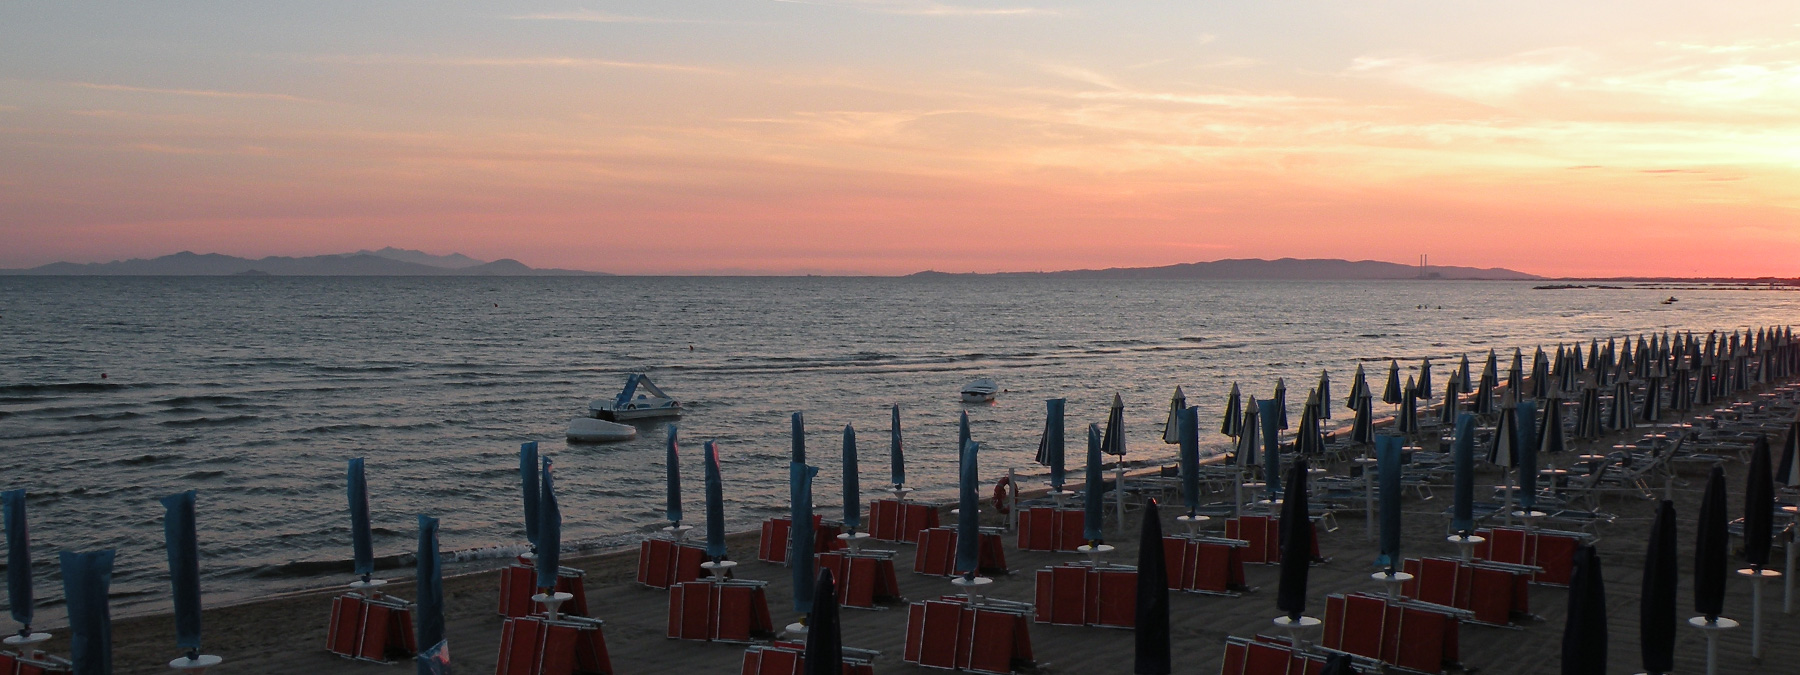 Family holidays in a hotel with restaurant and beach in Tuscany